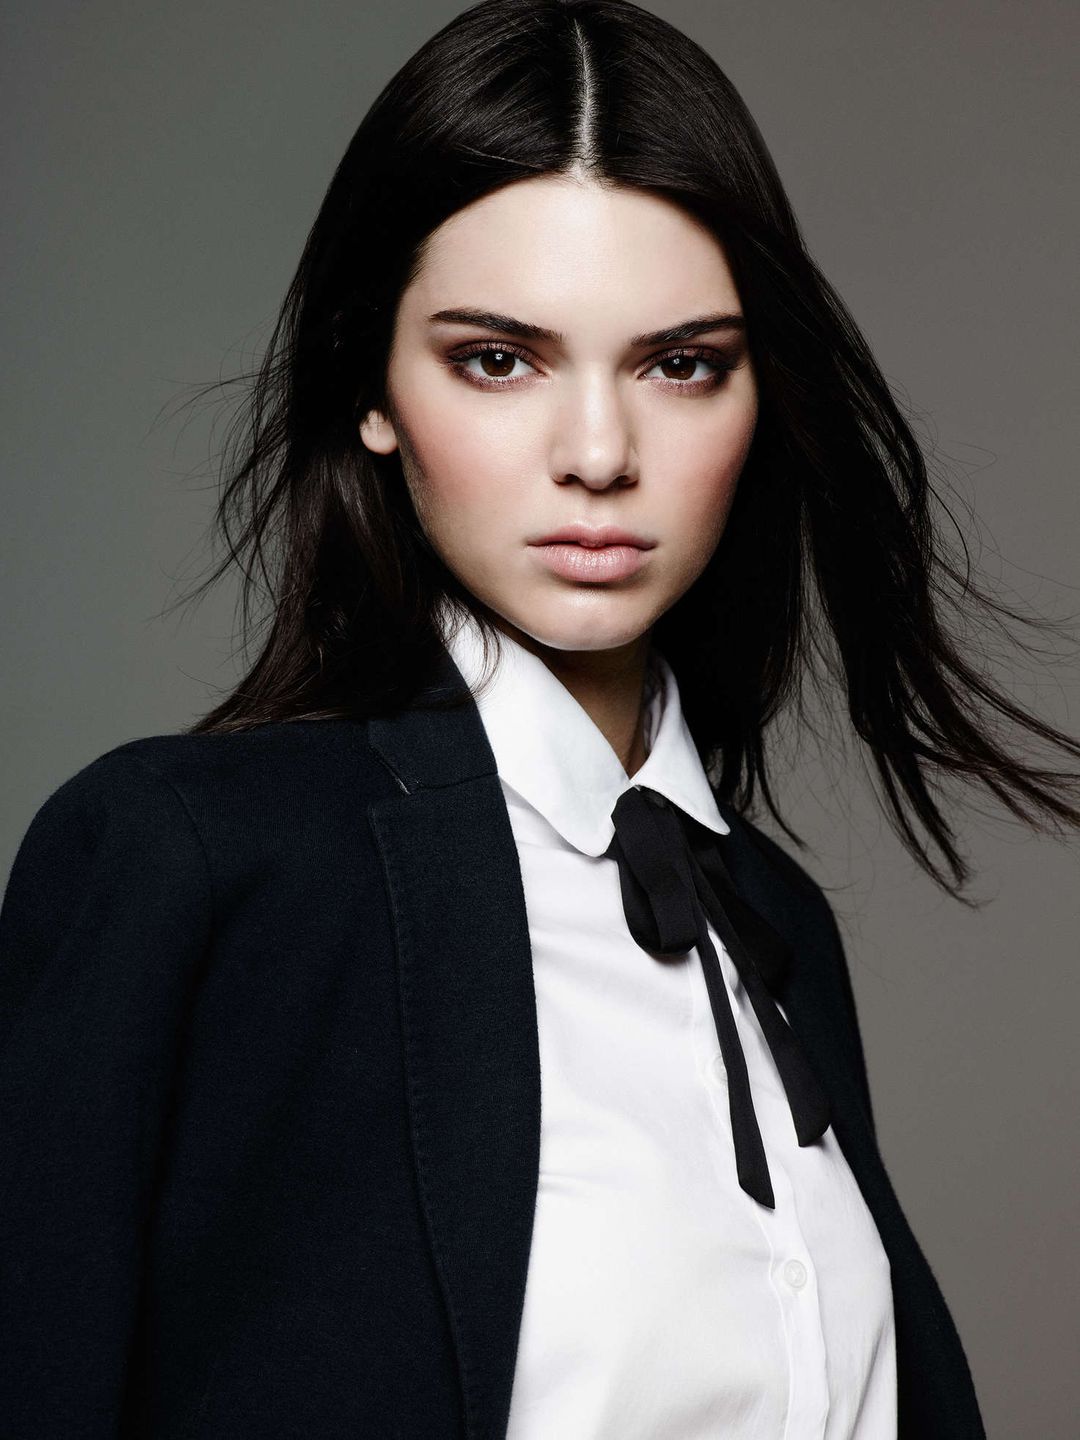 Kendall Jenner in her teens